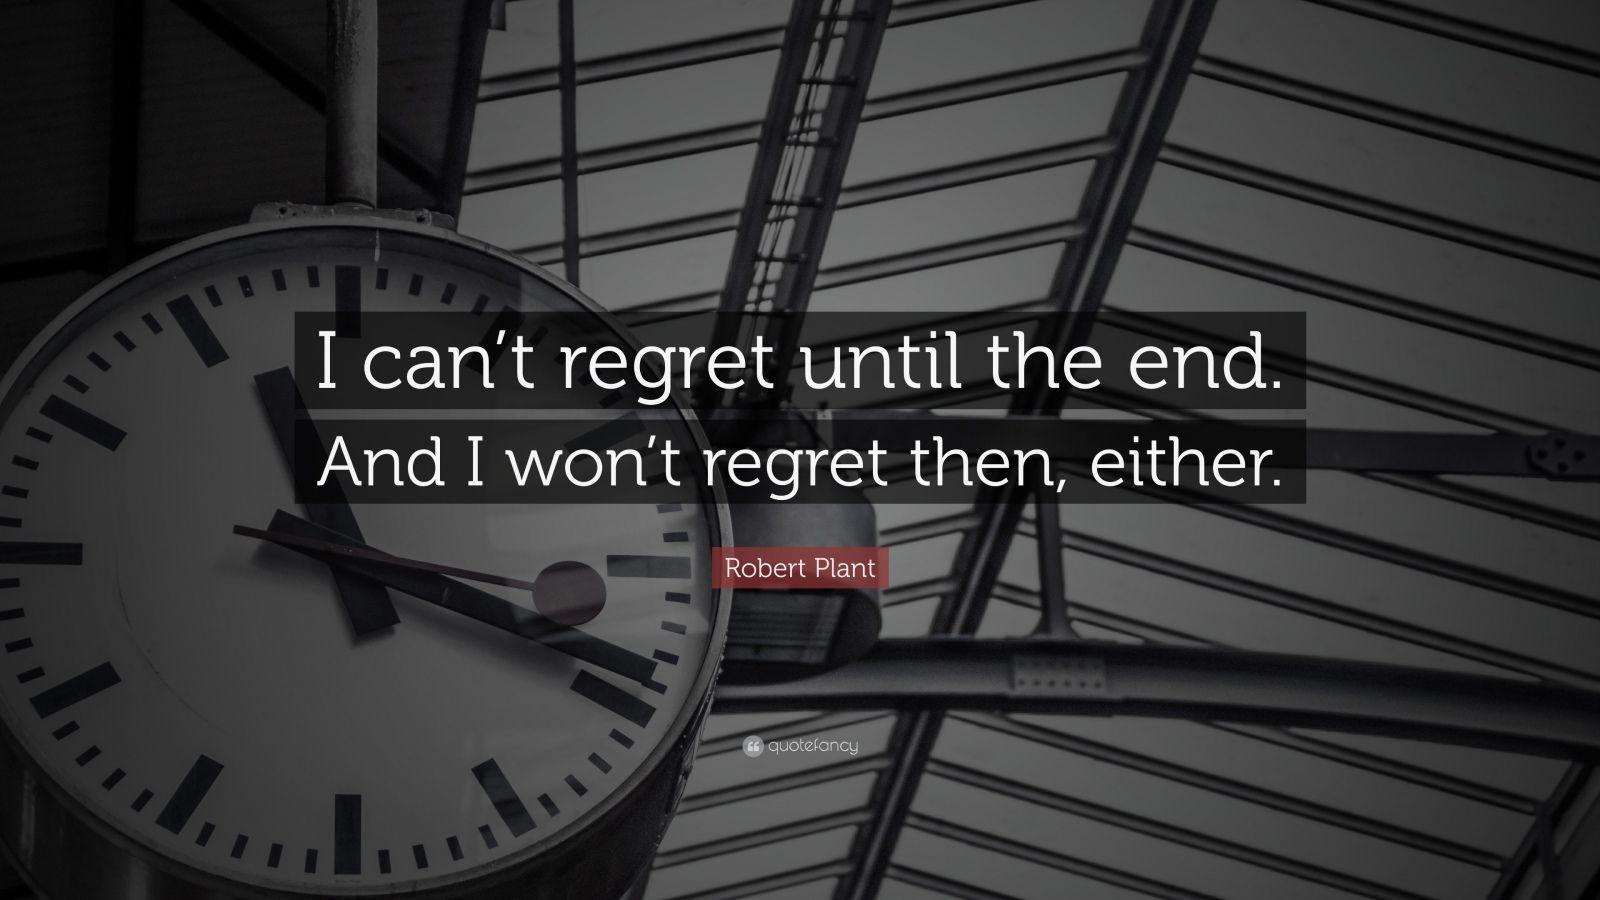 Robert Plant Quote: “I can't regret until the end. And I won't